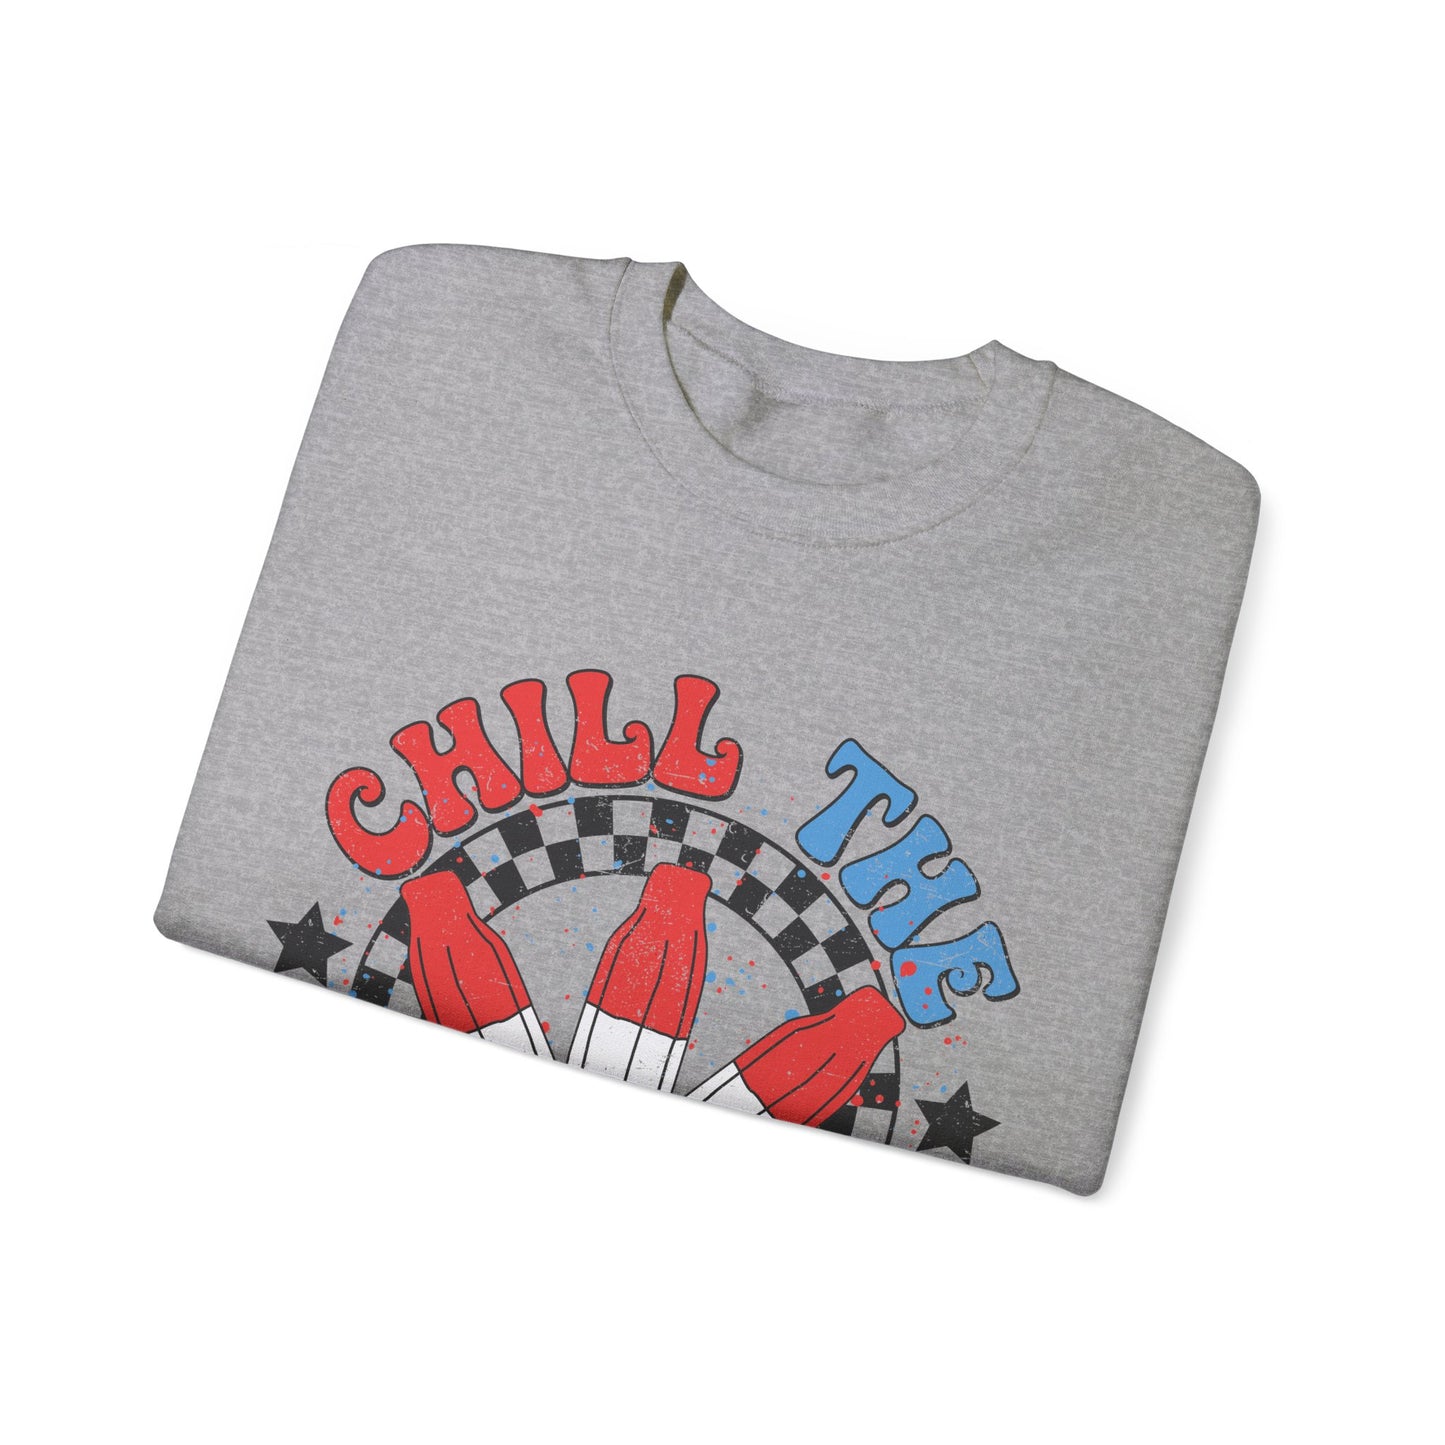 Chill the 4th Out - Crewneck Sweatshirt